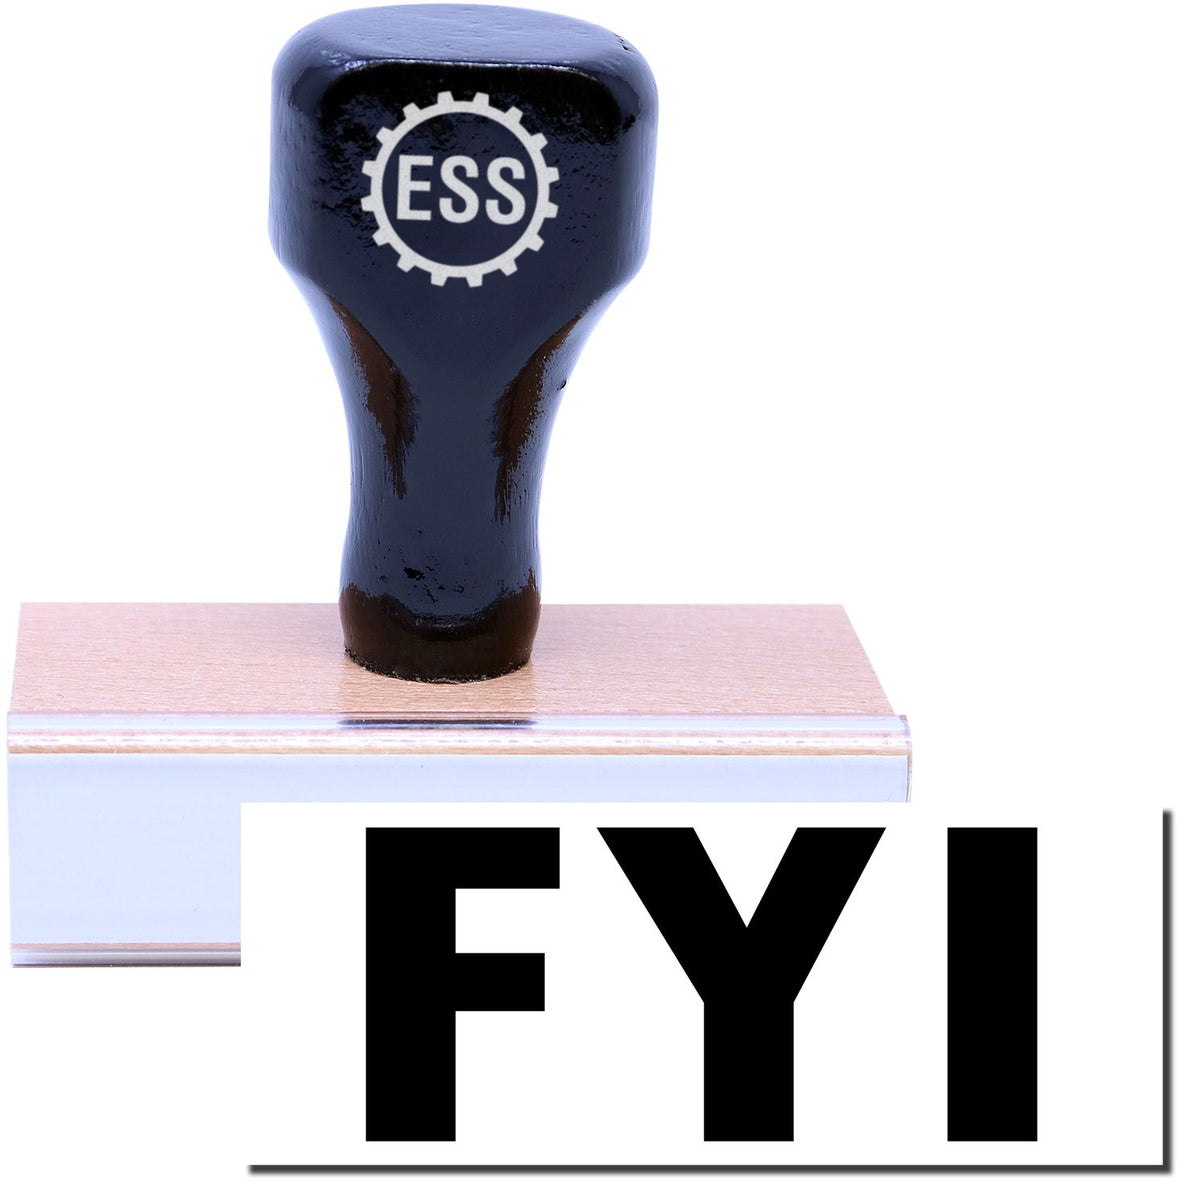 A stock office rubber stamp with a stamped image showing how the text &quot;FYI&quot; in a large font is displayed after stamping.